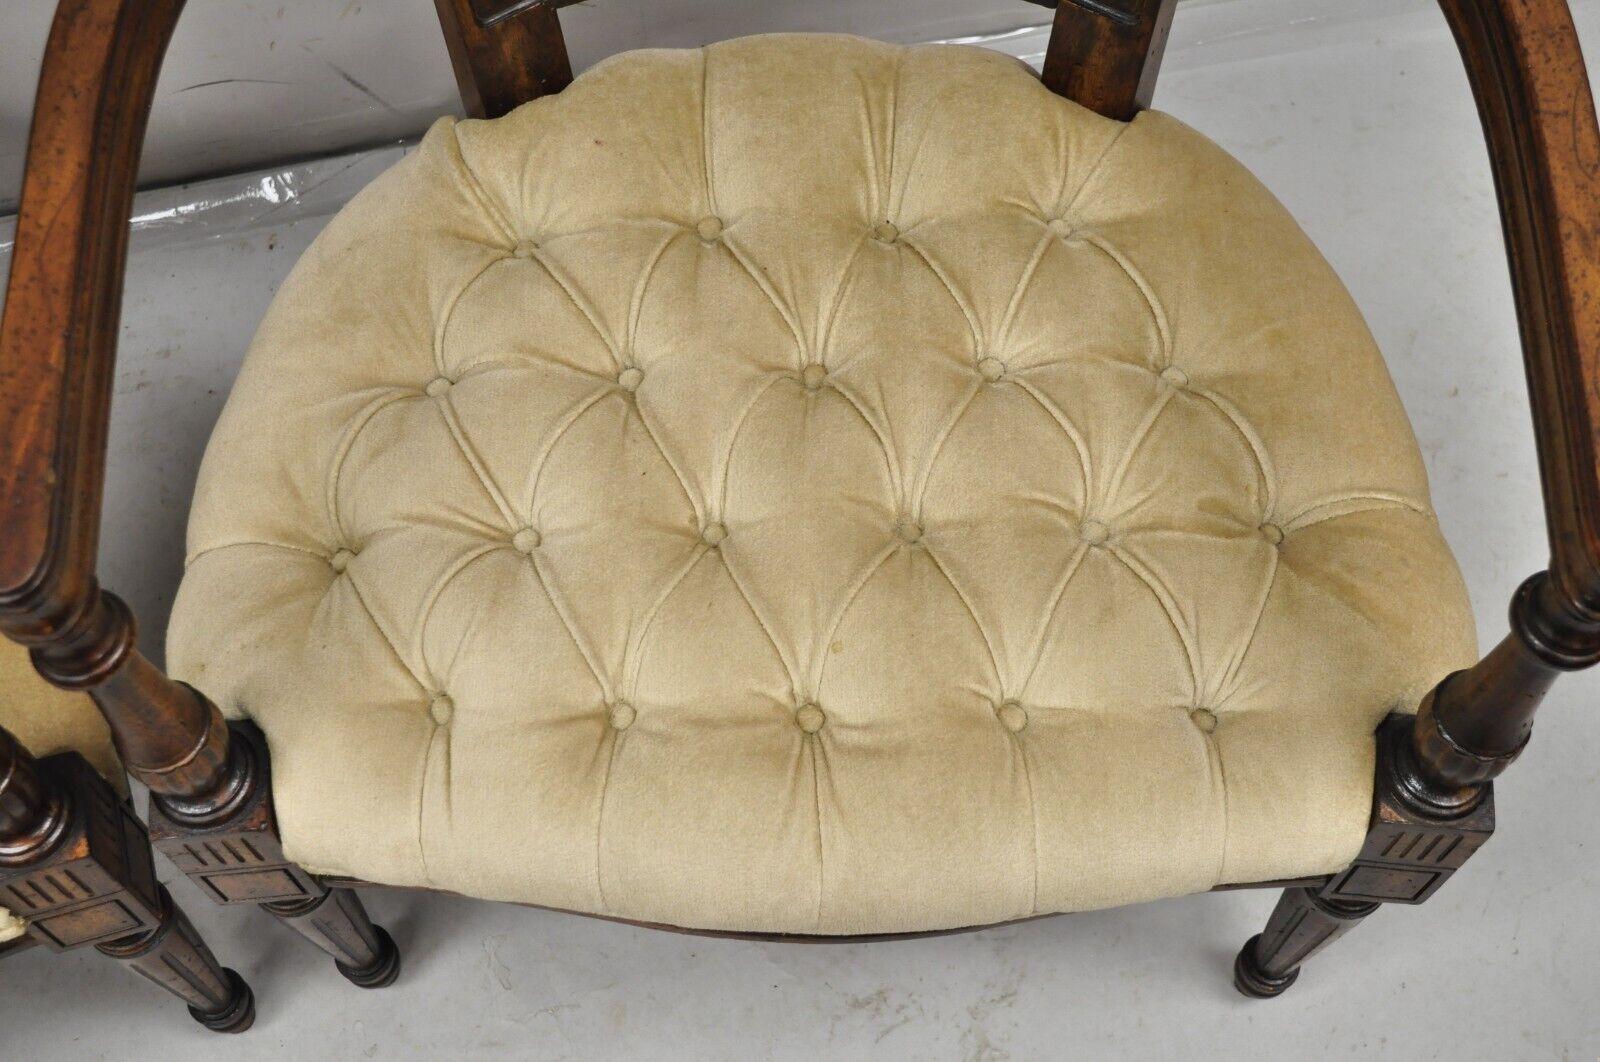 Vintage Hollywood Regency Tall Cane Back Fireside Lounge Armchairs - a Pair For Sale 2